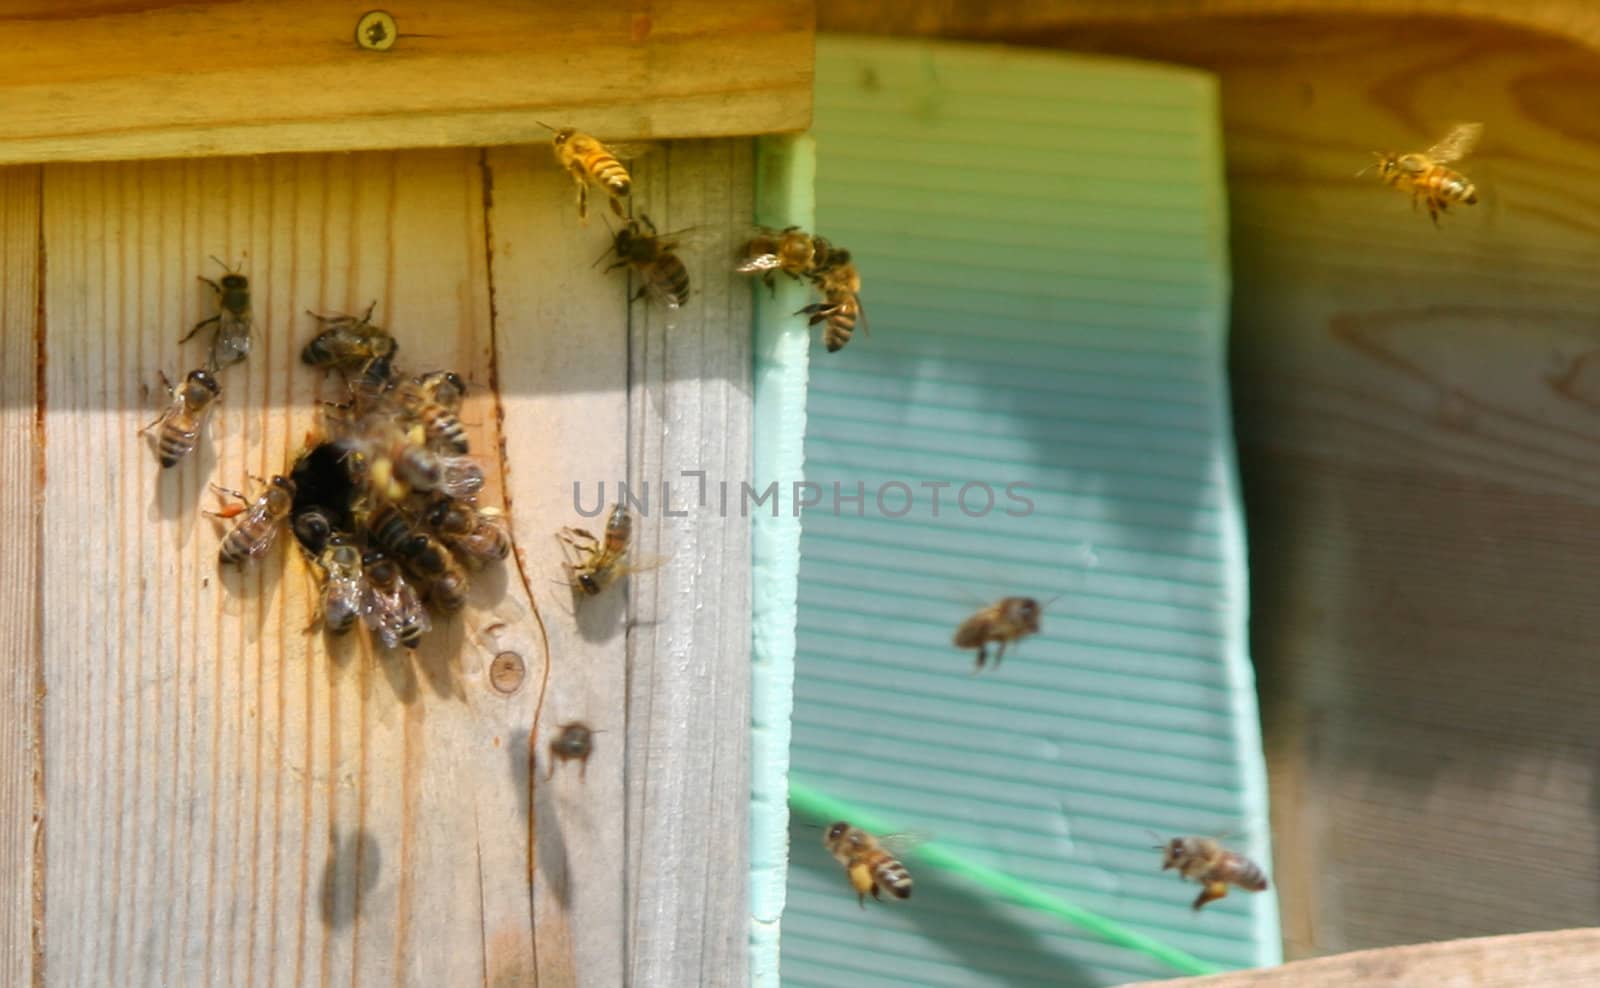 Bee, swarm, rural, risk, pollination, pollen, nectar, maintenance, lavoro, ispezionare, house, honey, hive, garden, food, farm, ecological, care, box, beekeeper, beehive, apiculture, apiary, api, all'aperto, agriculture, activity,